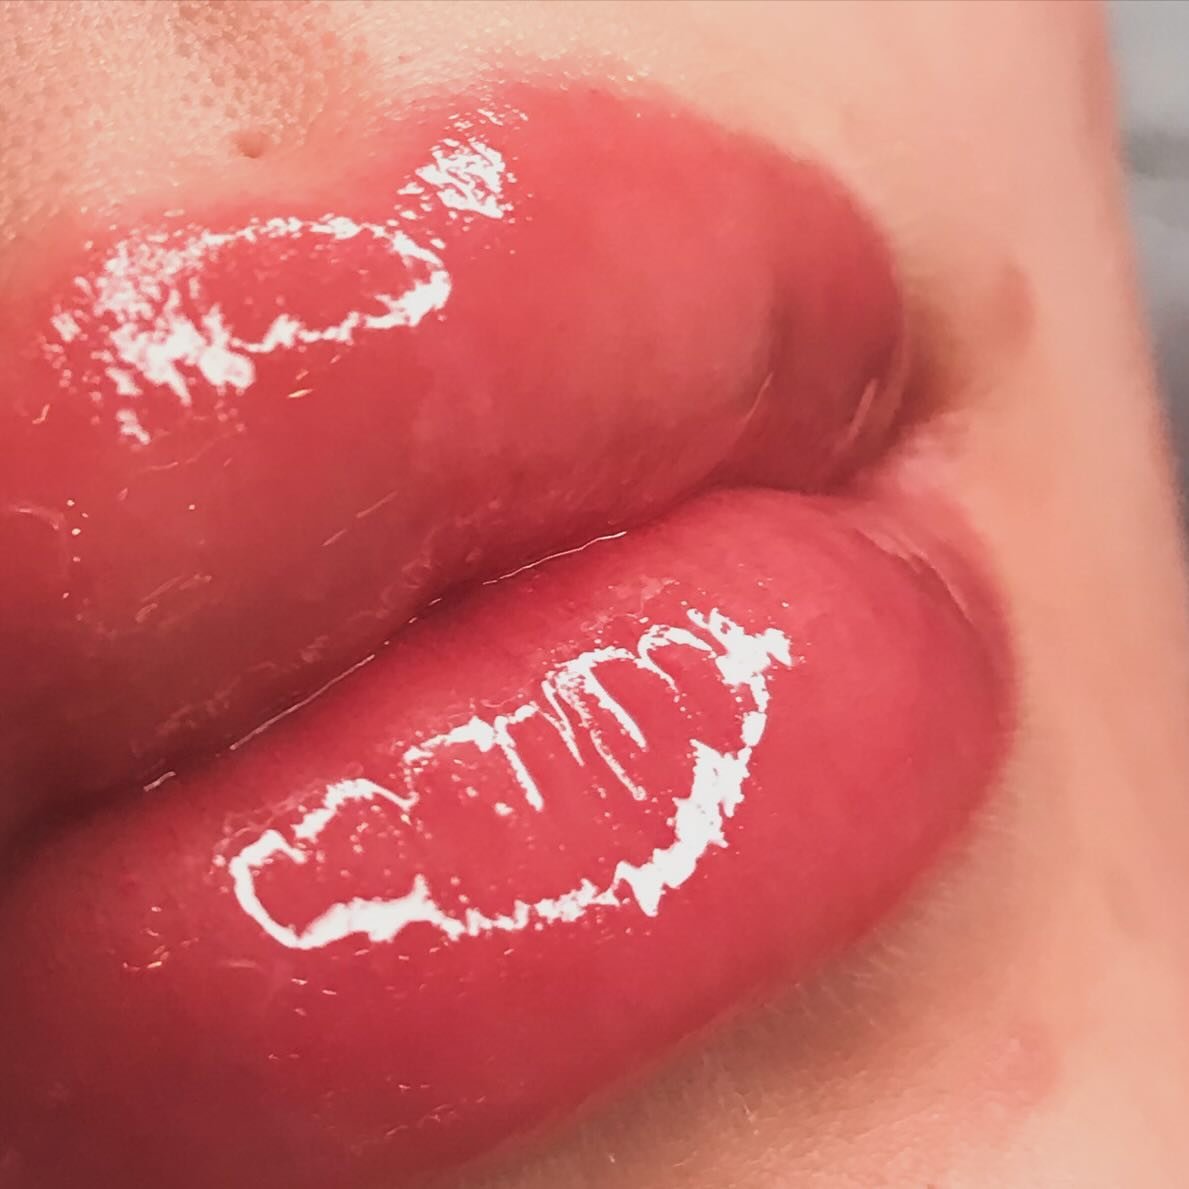 I went a little GlossTastic on these juicy lips. 
Of course! Here they are without numbering:

#LipBlushing
#LipBlush
#SoftContourLips
#CosmeticTattoo
#PermanentMakeup
#LipTattoo
#NaturalLips
#BeautyInk
#EnhanceYourSmile